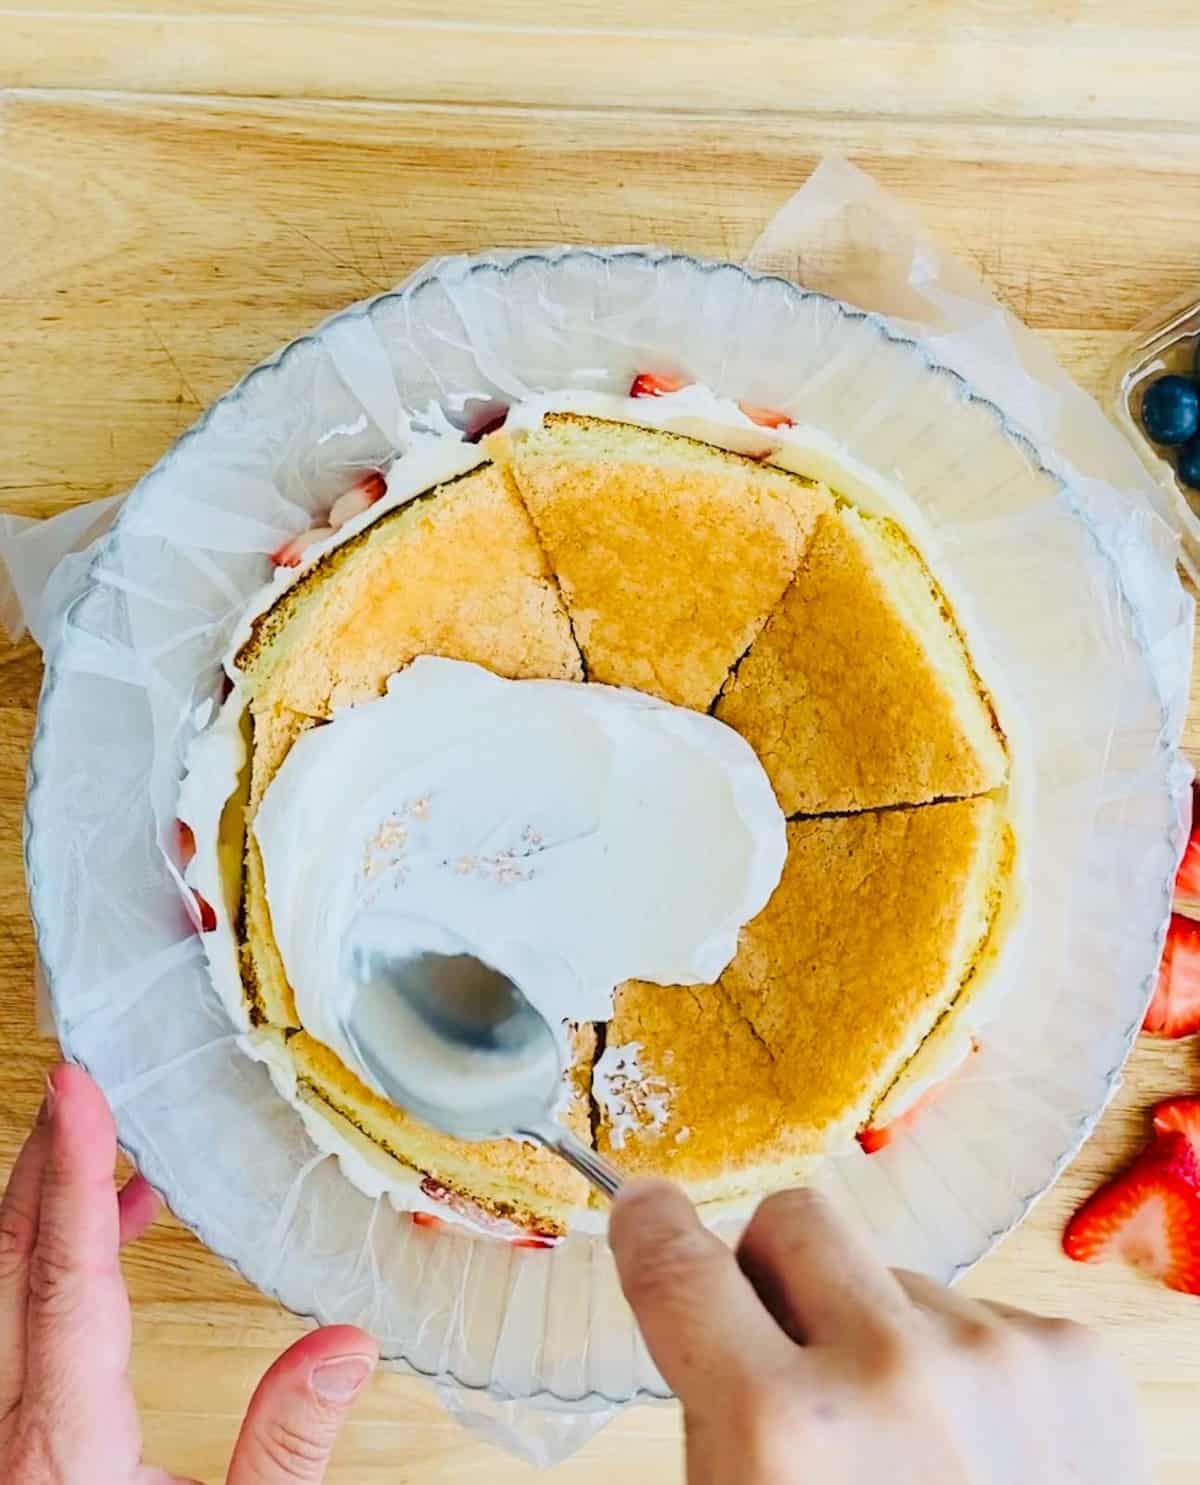 Inside of fruit dome cake with whipped cream being spread on sponge cake layers